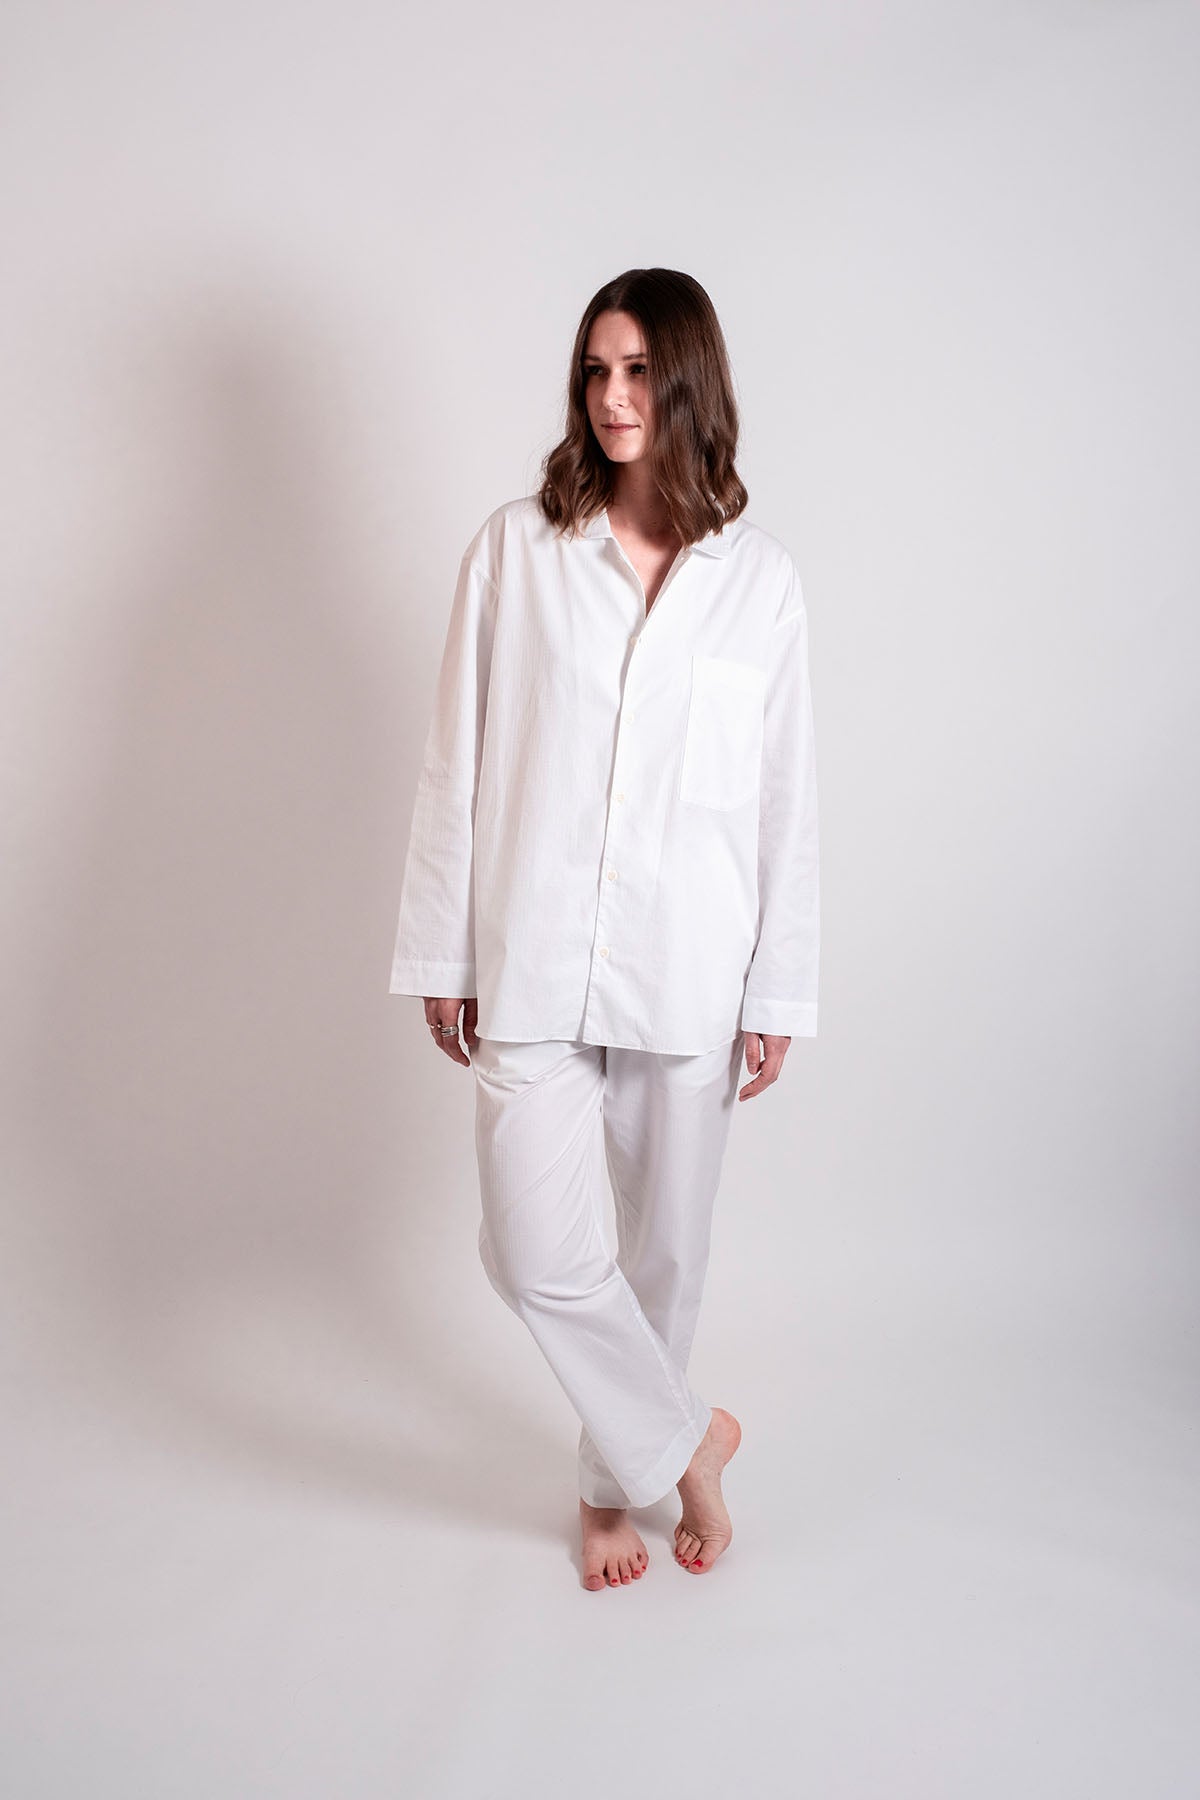 model in sustainable pyjama_color worthy white_front view_avonte